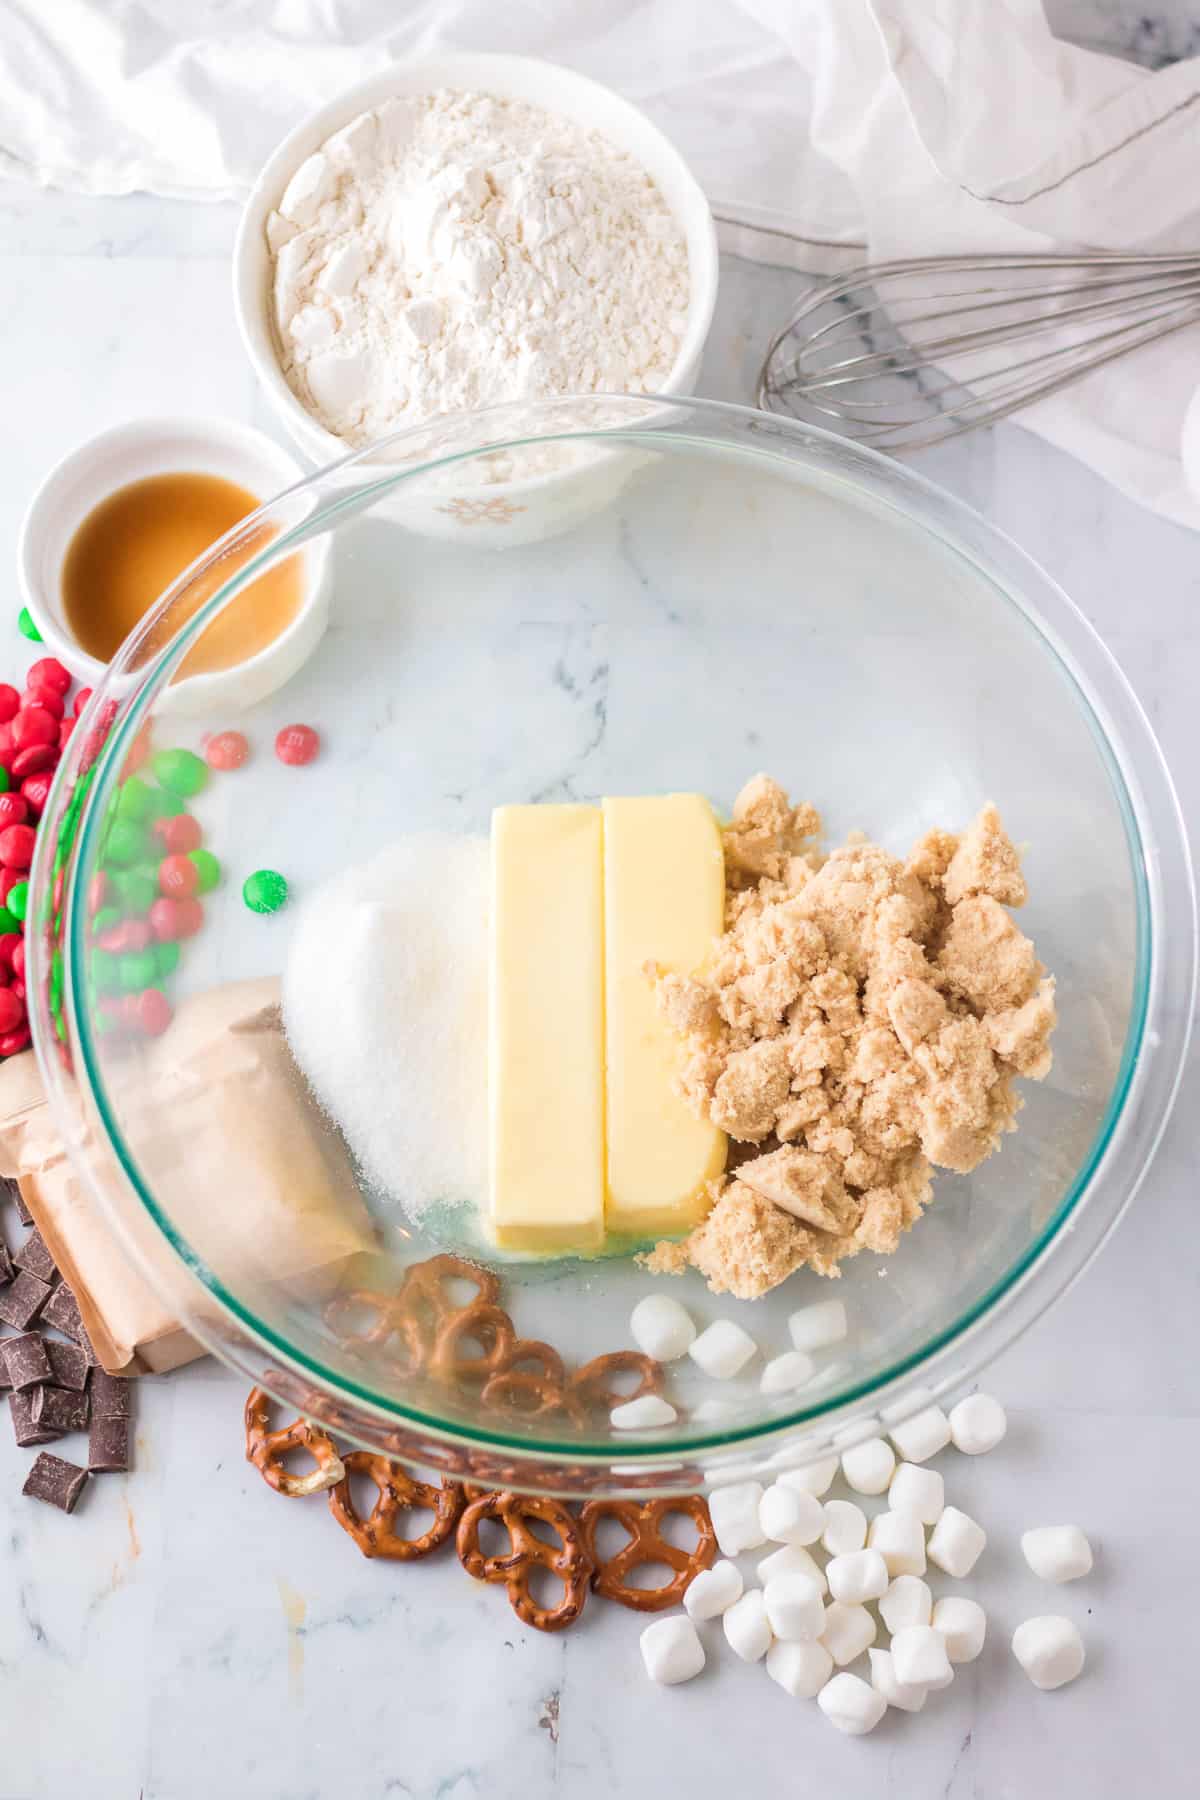 Butter, brown sugar and white sugar in a mixing bowl on a counter from overhead with other cookie ingredients on the counter nearby.